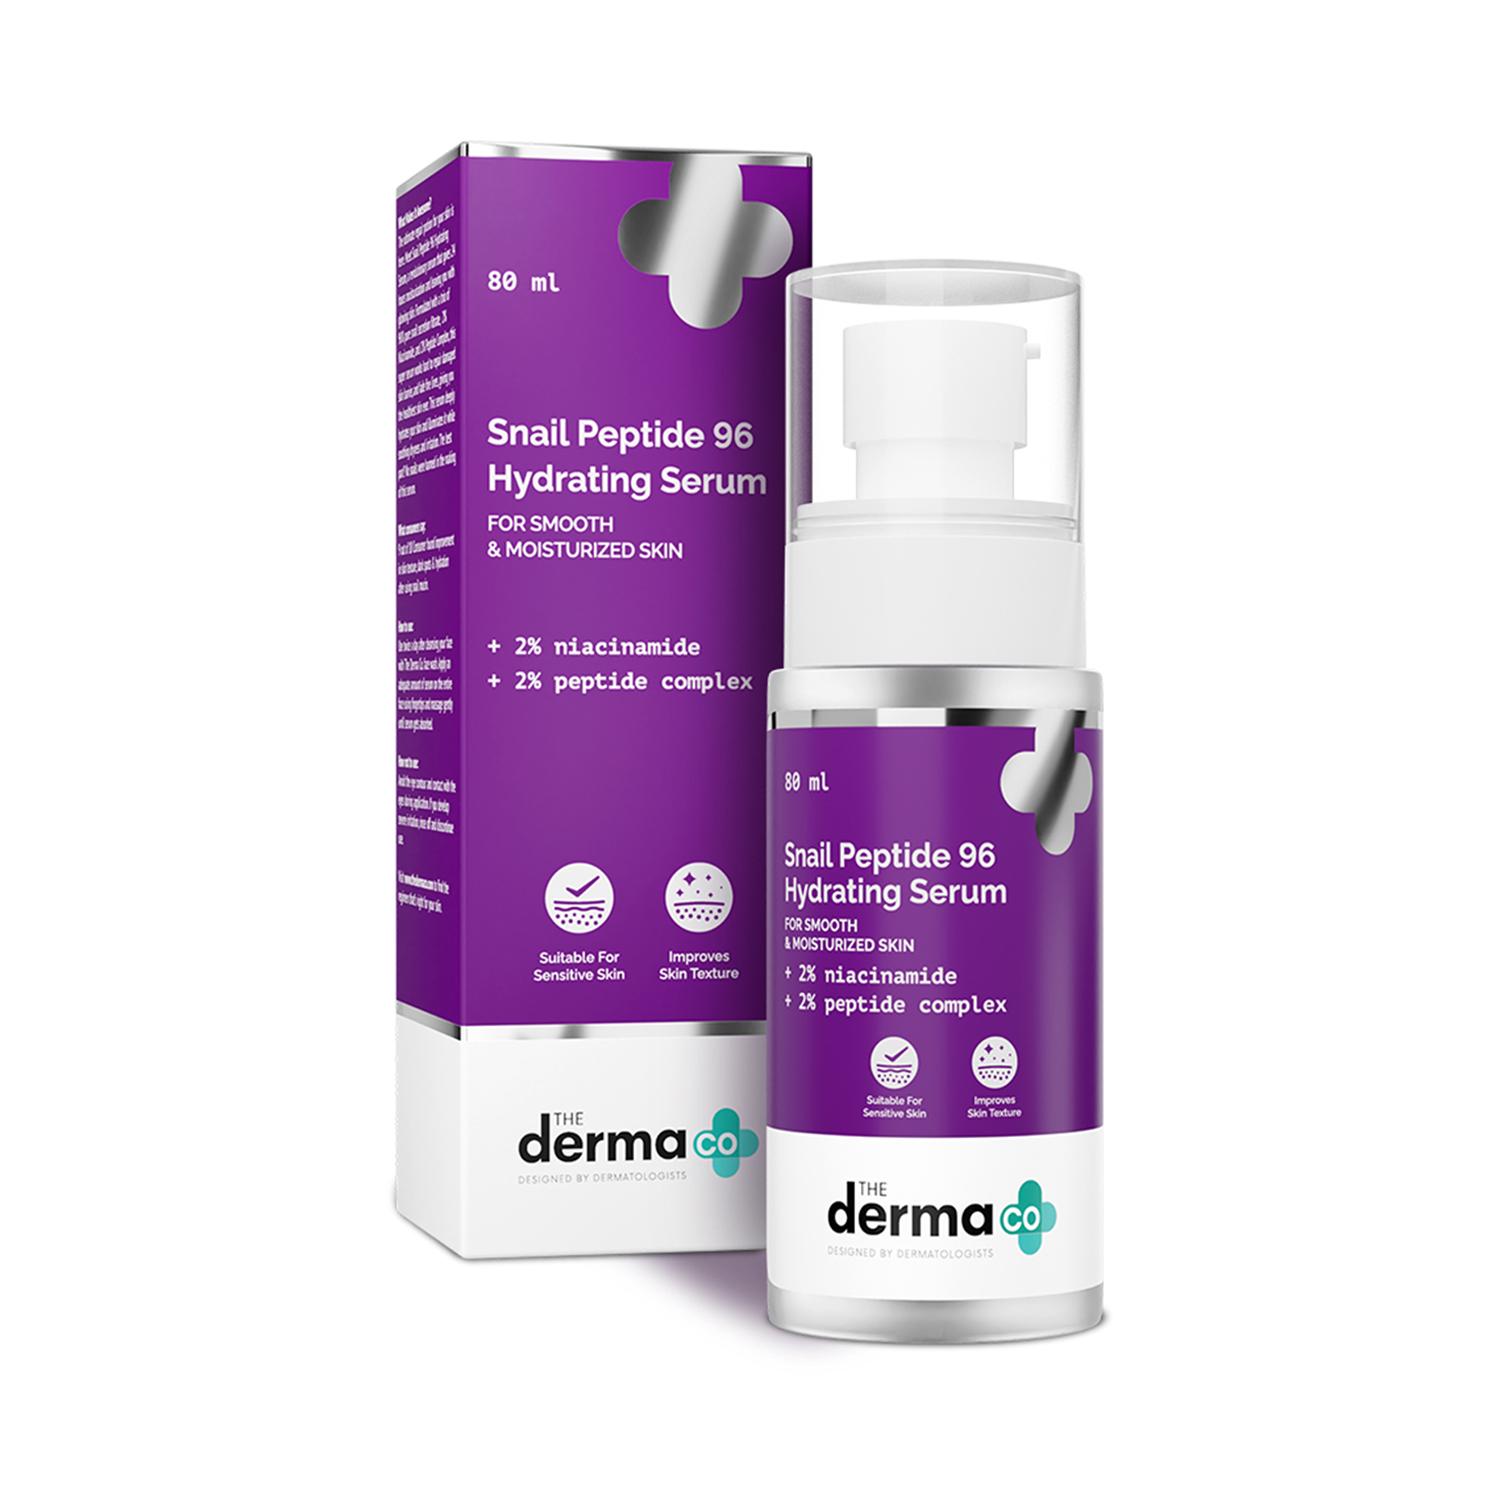 The Derma Co | The Derma Co Snail Peptide 96 Hydrating Serum with Snail Mucin & Peptide Complex (80 ml)